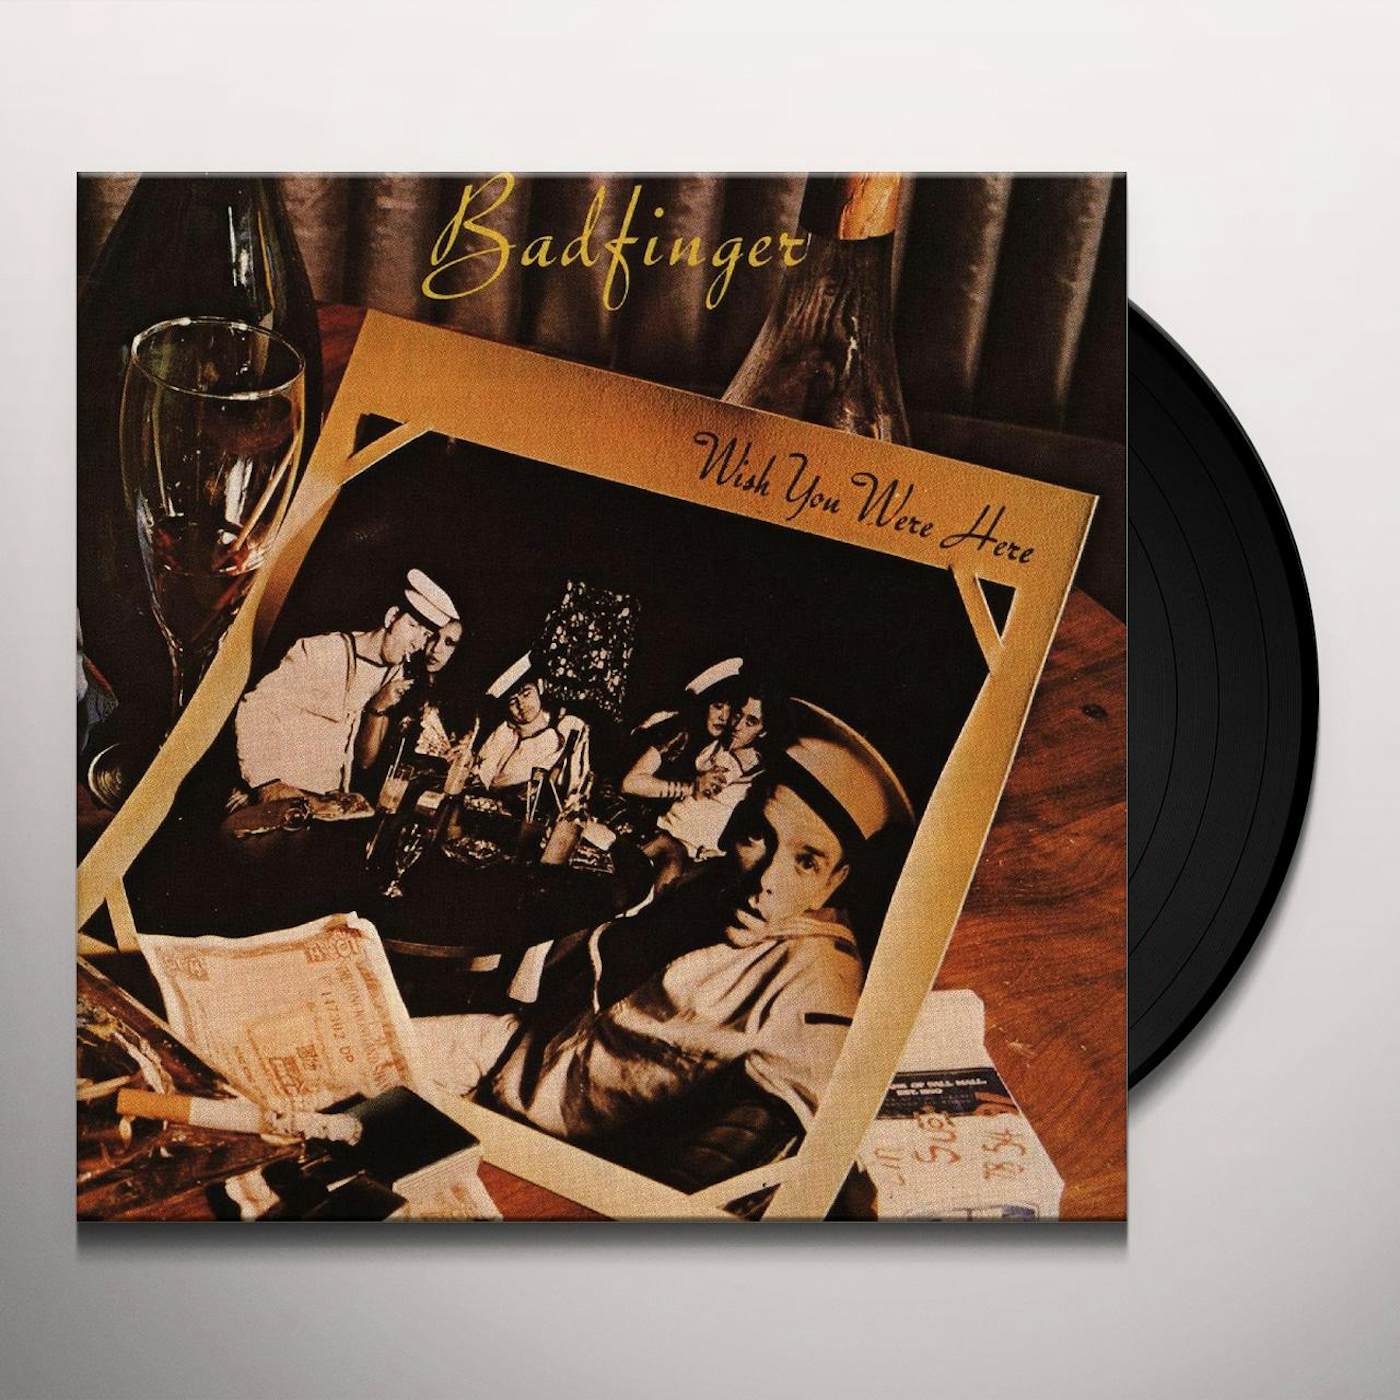 Badfinger WISH YOU WERE HERE (SYEOR 2018 EXCLUSIVE) Vinyl Record